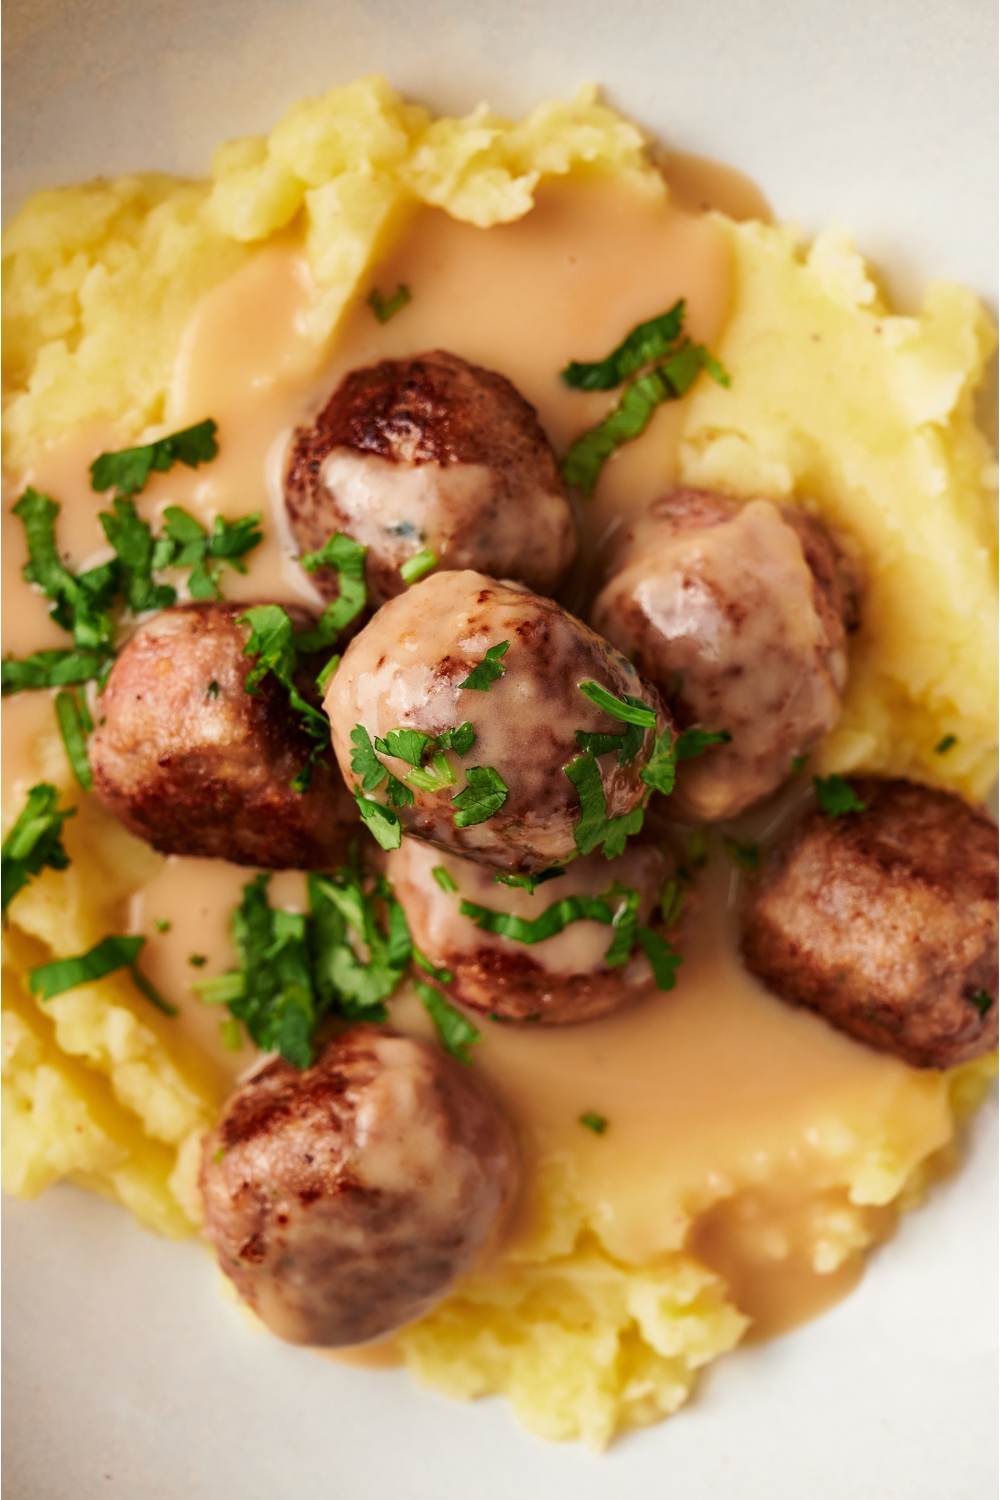 A plate of Swedish meatballs on a bed of mashed potatoes. Creamy gravy covers the potatoes and there is a garnish of fresh green herbs on top.